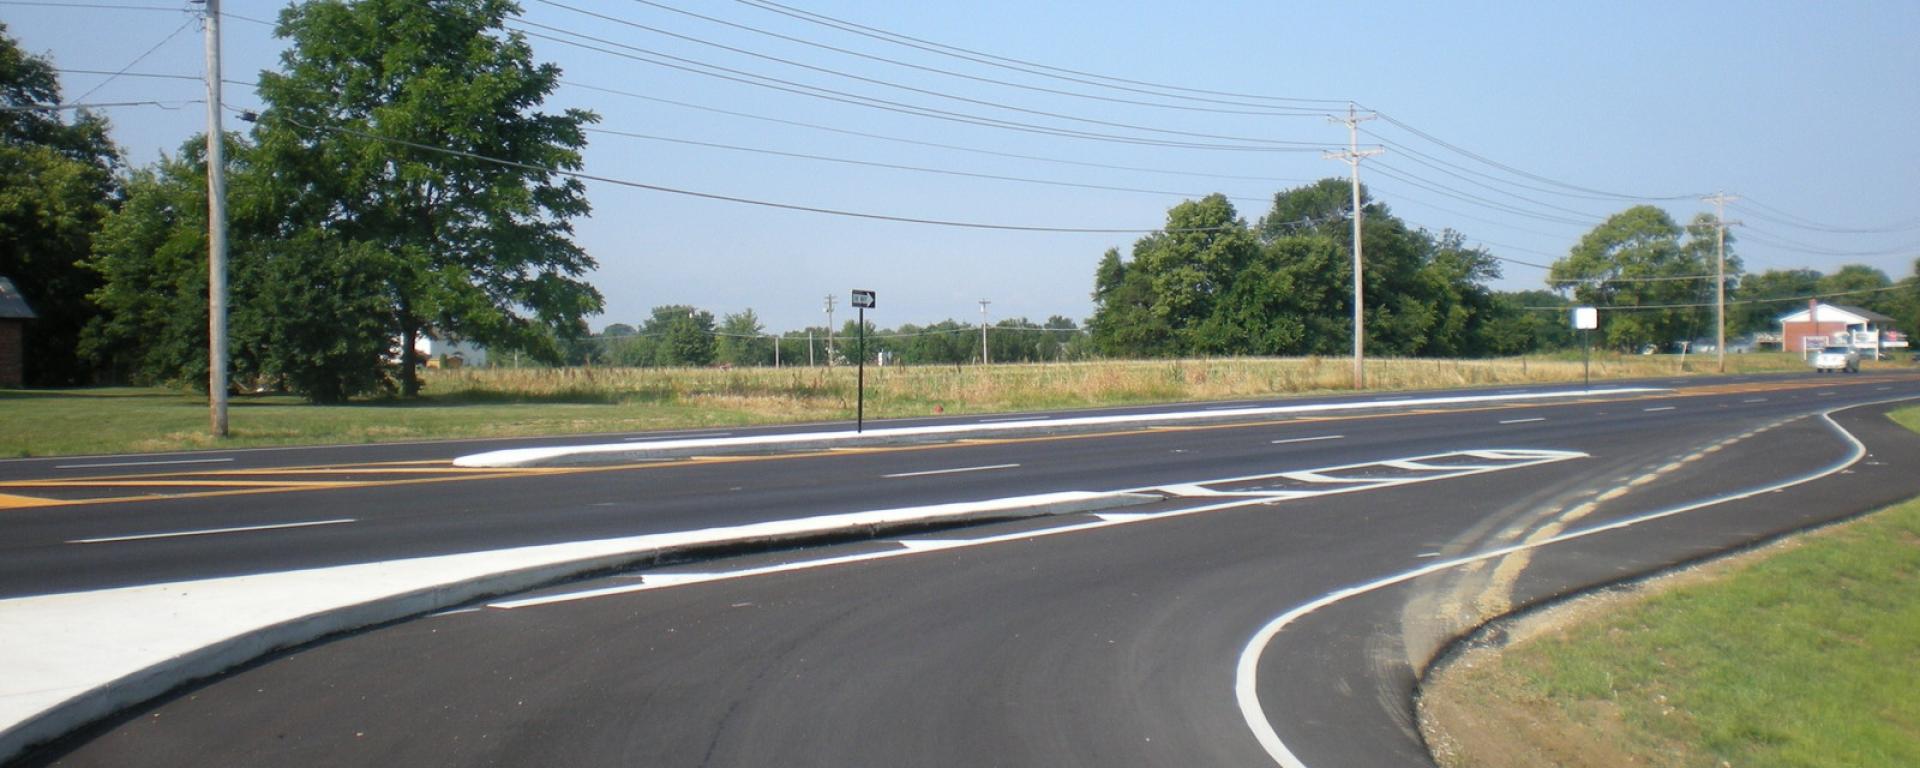 median in the center of the roadway